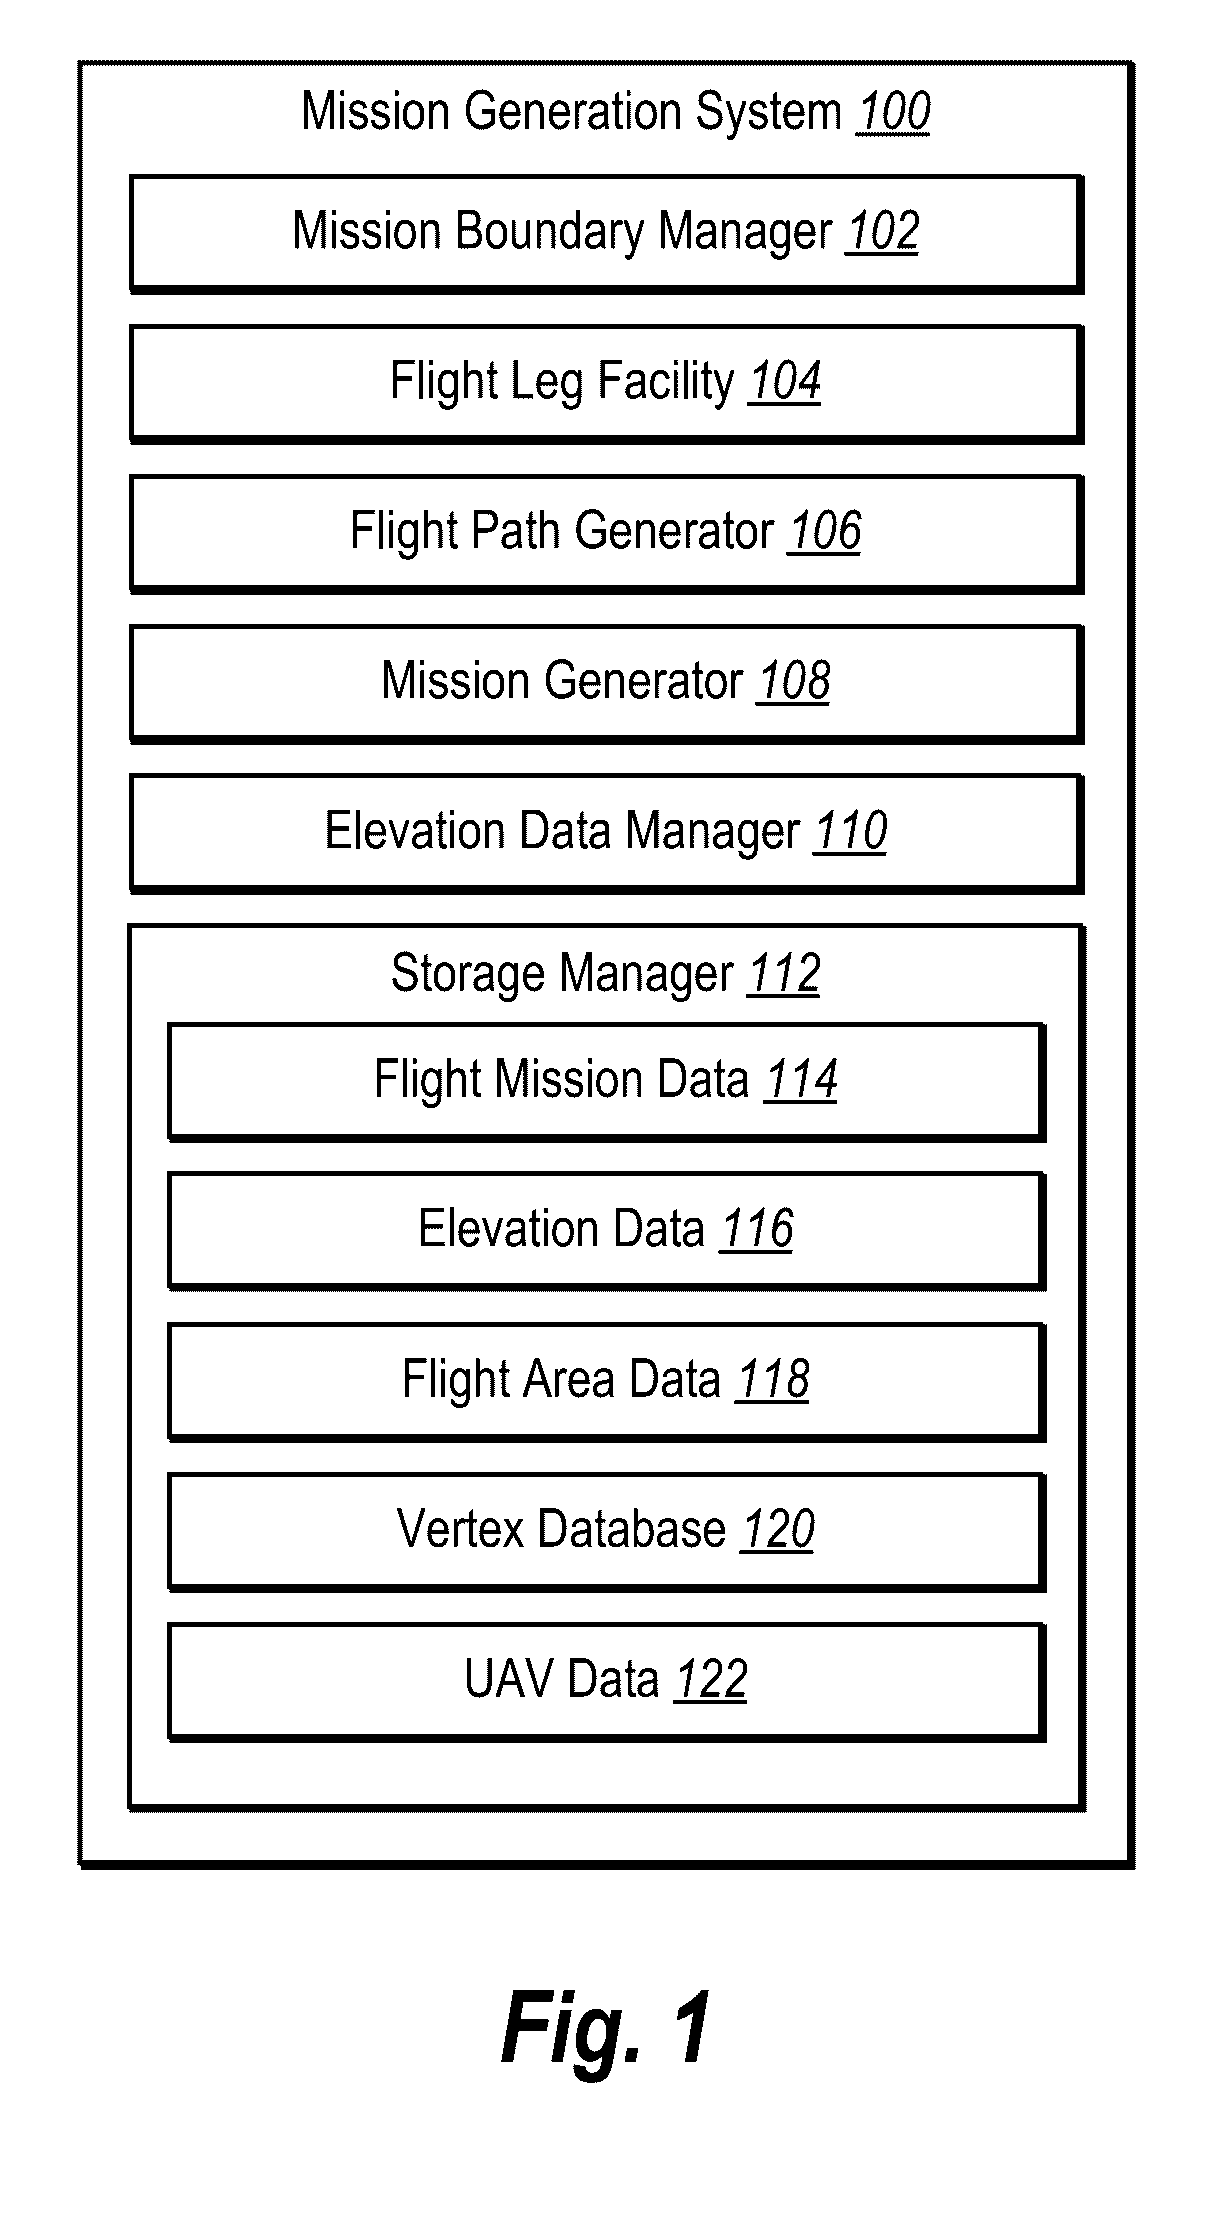 Generating a mission plan for capturing aerial images with an unmanned aerial vehicle